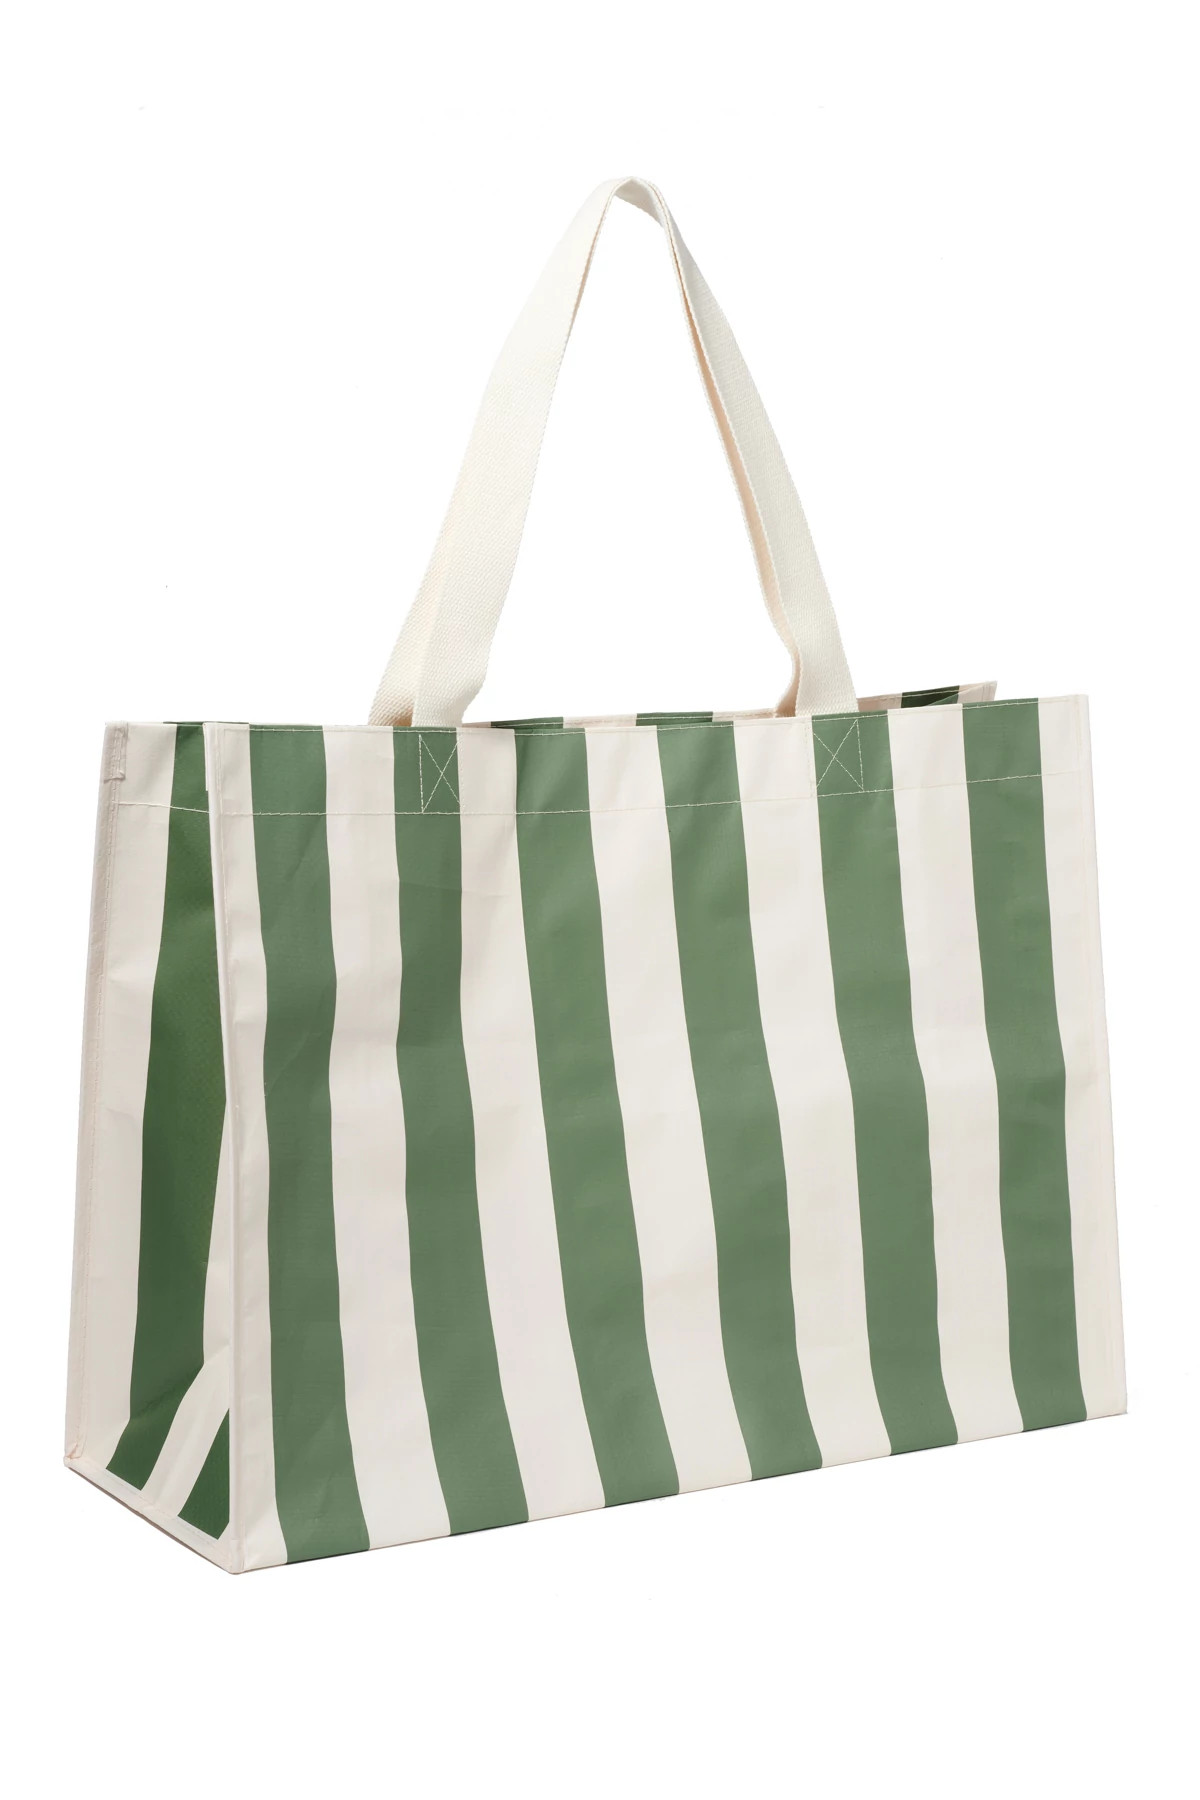 OLIVE Carryall Beach Tote image number 2